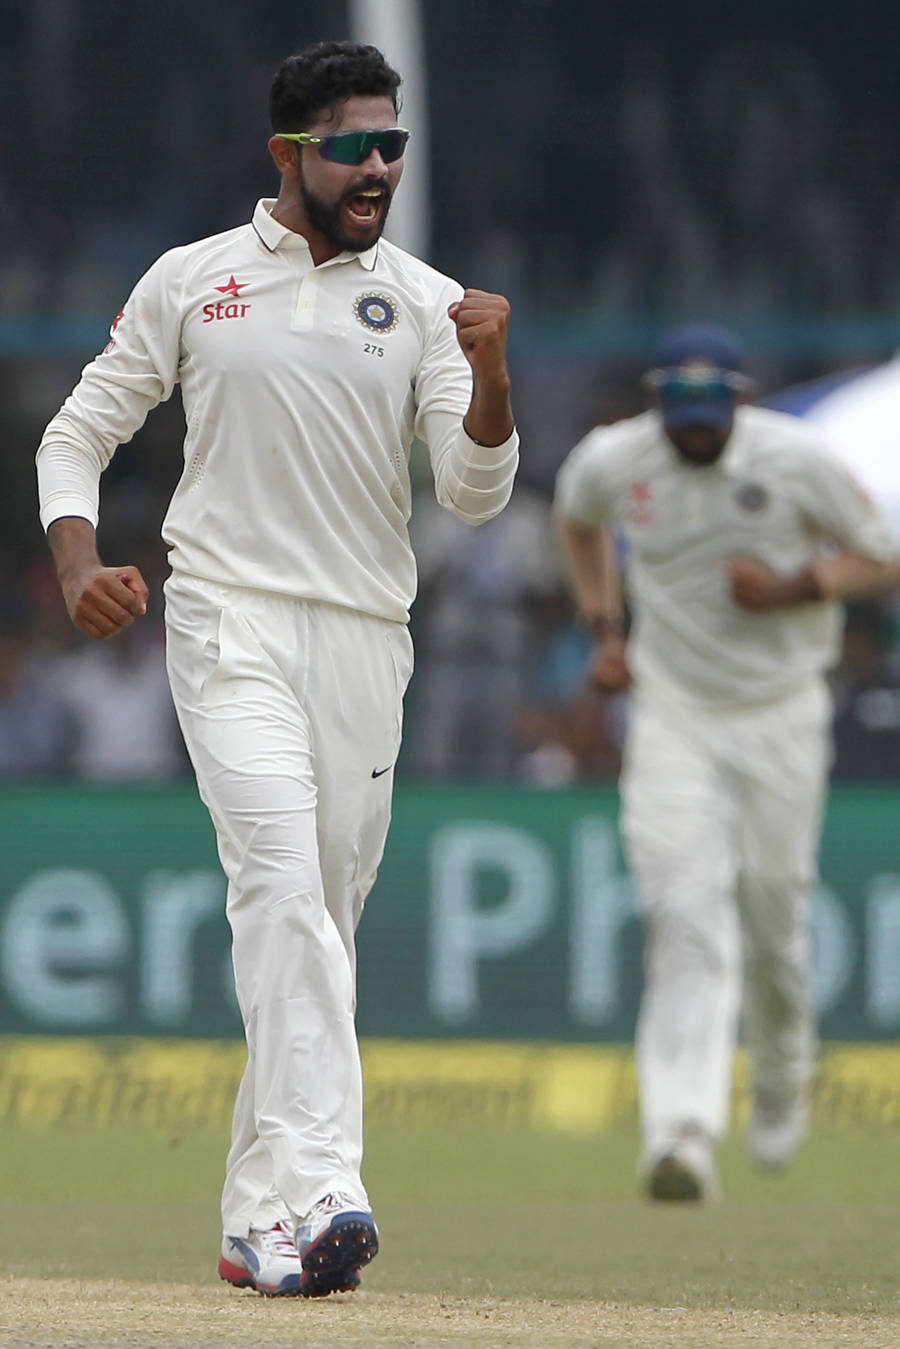 Ravindra Jadeja of India celebrates the wicket of Ish Sodhi of New Zealand during day 3 of the first test match between India and New Zealand held at the Green Park stadium on the 24th September 2016. Photo by: Deepak Malik/ BCCI/ SPORTZPICS